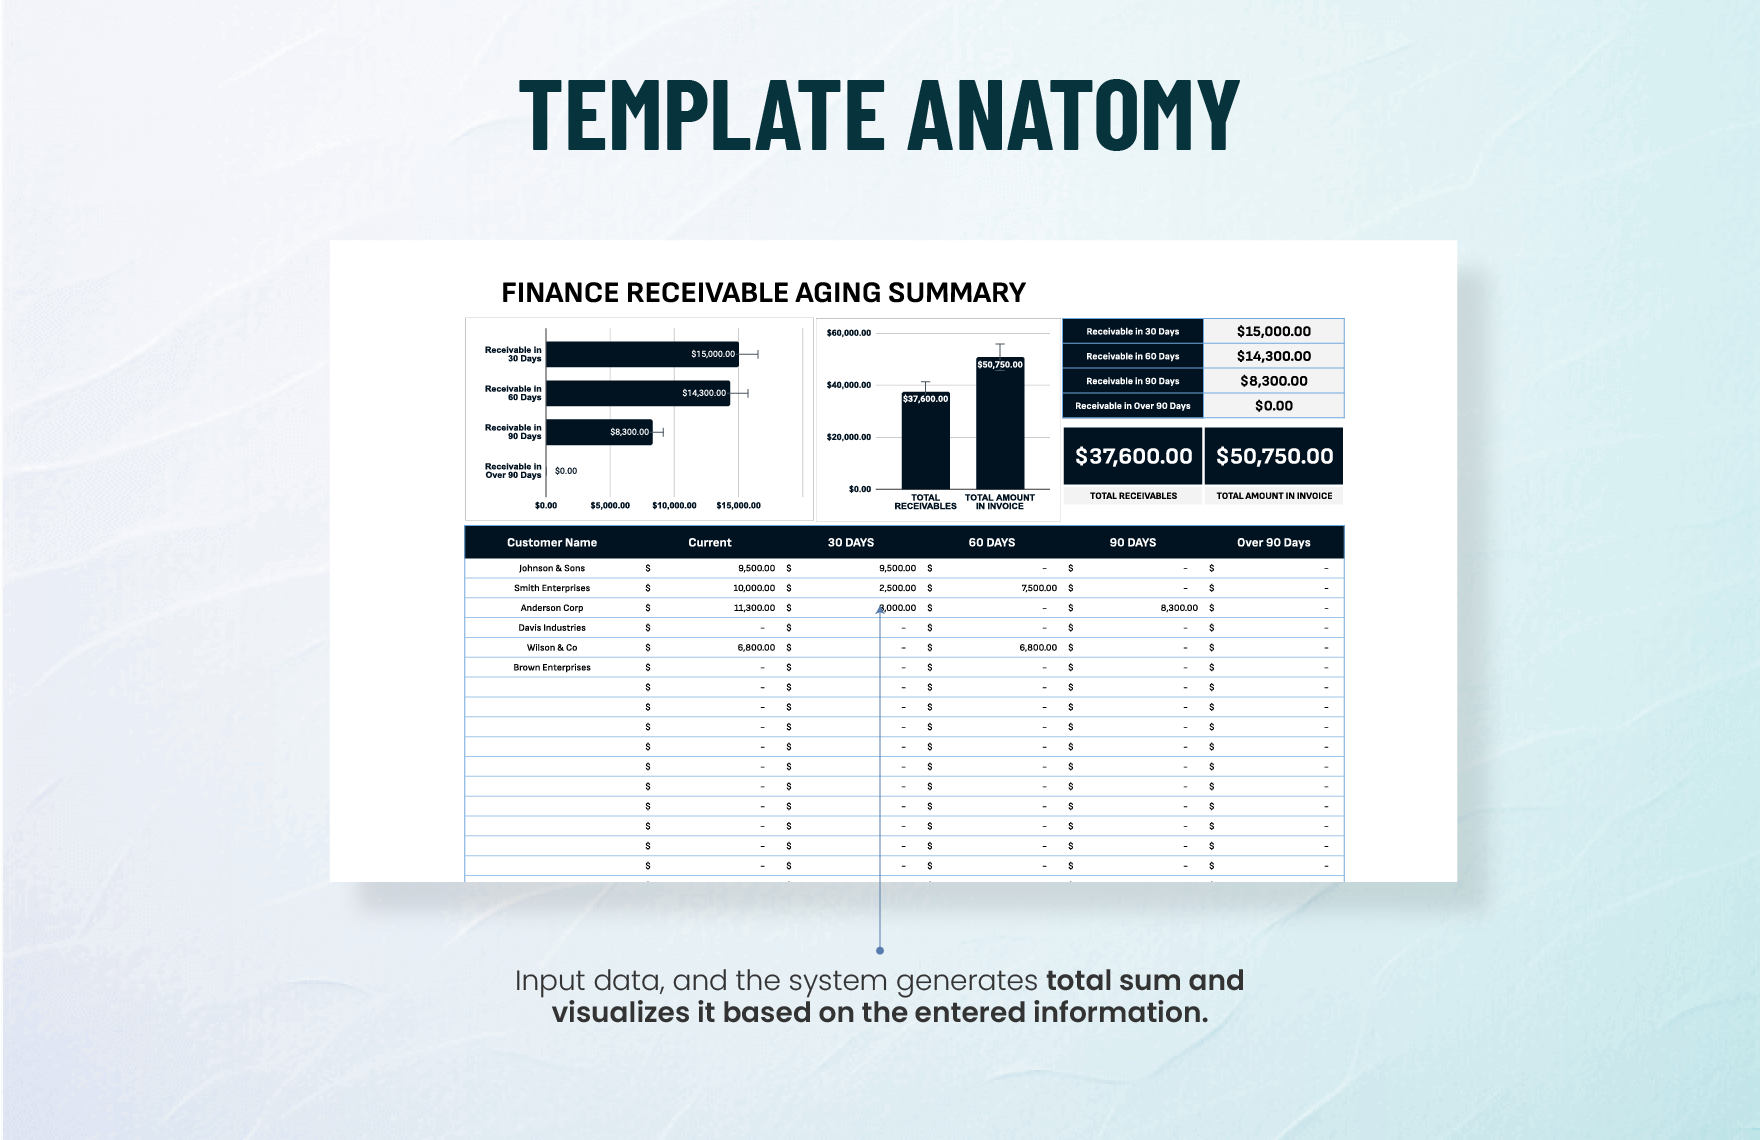 Finance Receivables Aging Summary Template